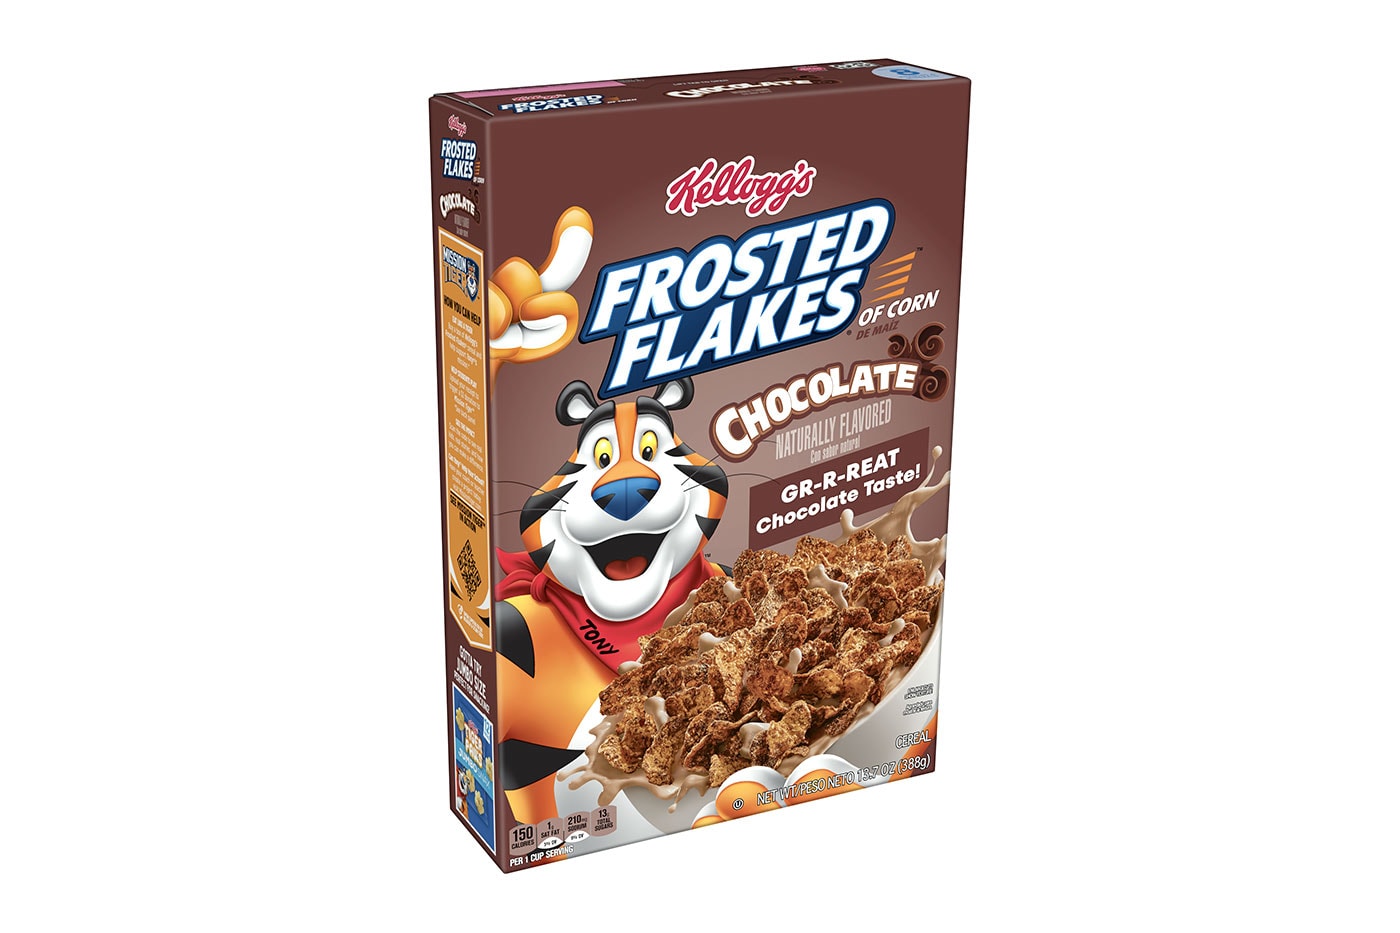 Kellogg's Releases Three New Frosted Flakes Cereal Flavors strawberry milkshake cinnamon french toast chocolate tony the tiger they're great